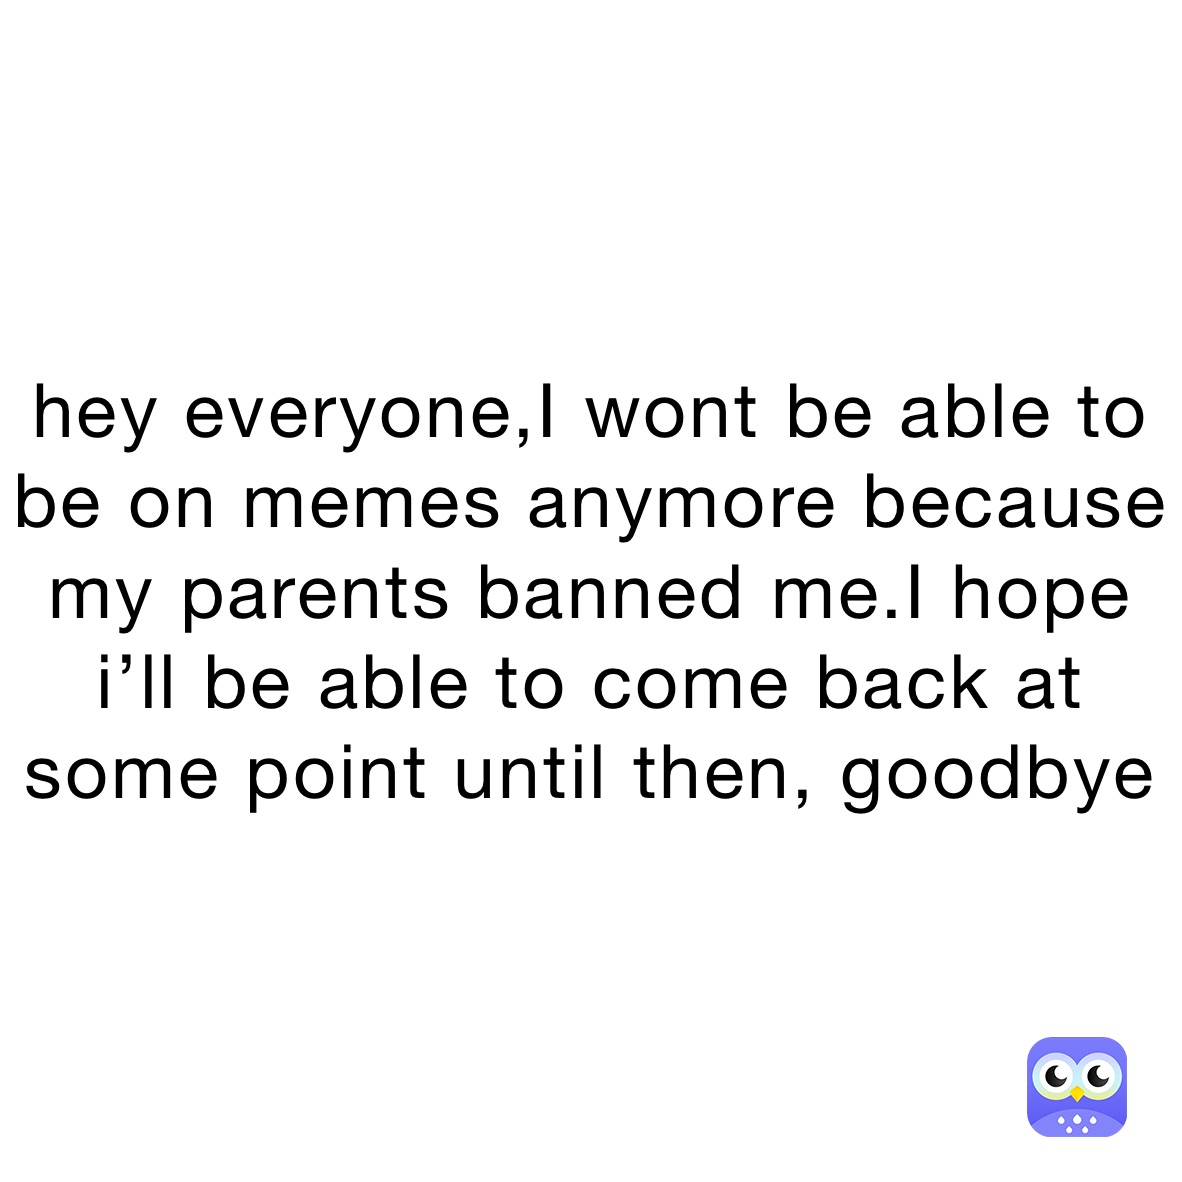 hey everyone,I wont be able to be on memes anymore because my parents banned me.I hope i’ll be able to come back at some point until then, goodbye